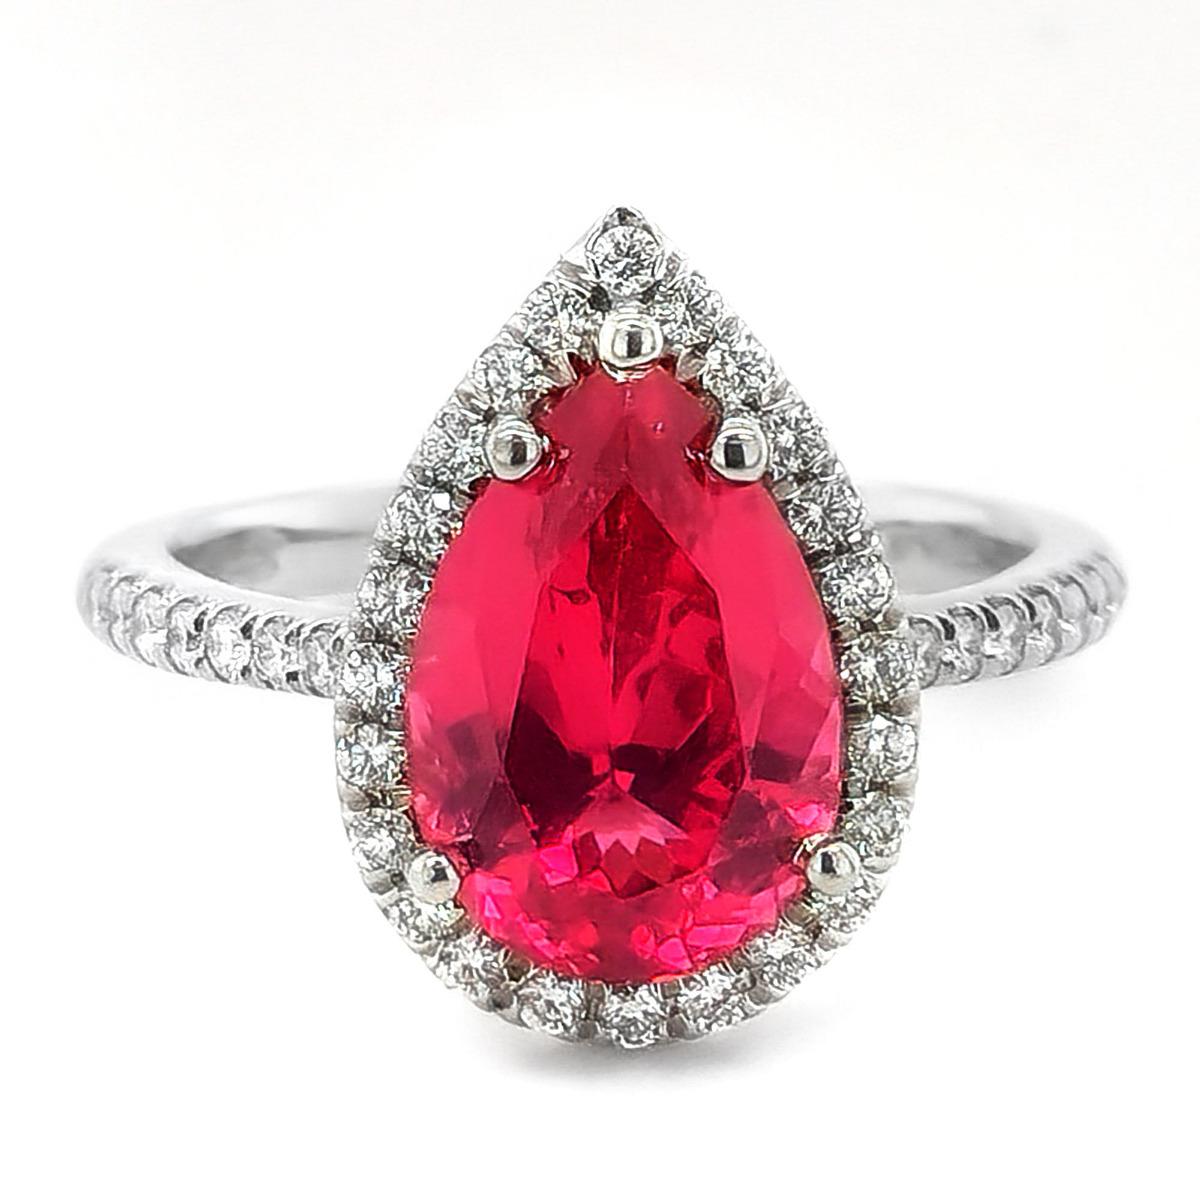 Art Nouveau GRS Certified 4.22 Carat Unheated Pink Spinel Diamond Platinum Ring, Halo Ring For Sale